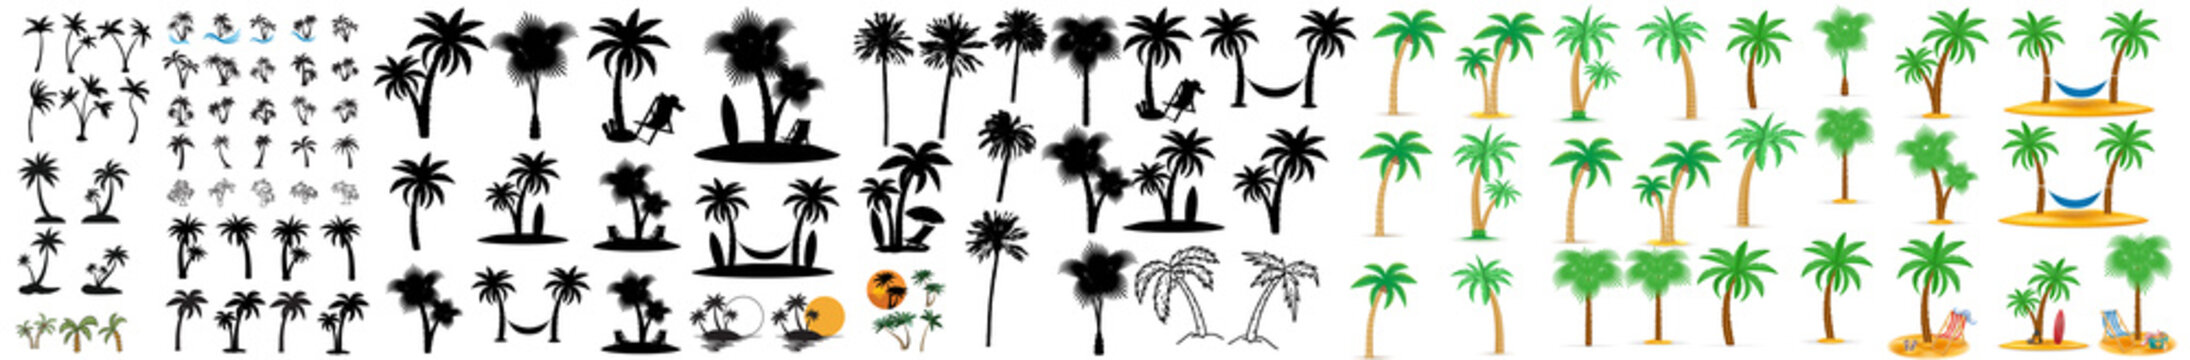  Palm silhouettes. Highly Detailed Palm Trees, Tropical trees for design about nature. A palm tree isolated on white. Black palm trees set isolated on white background.